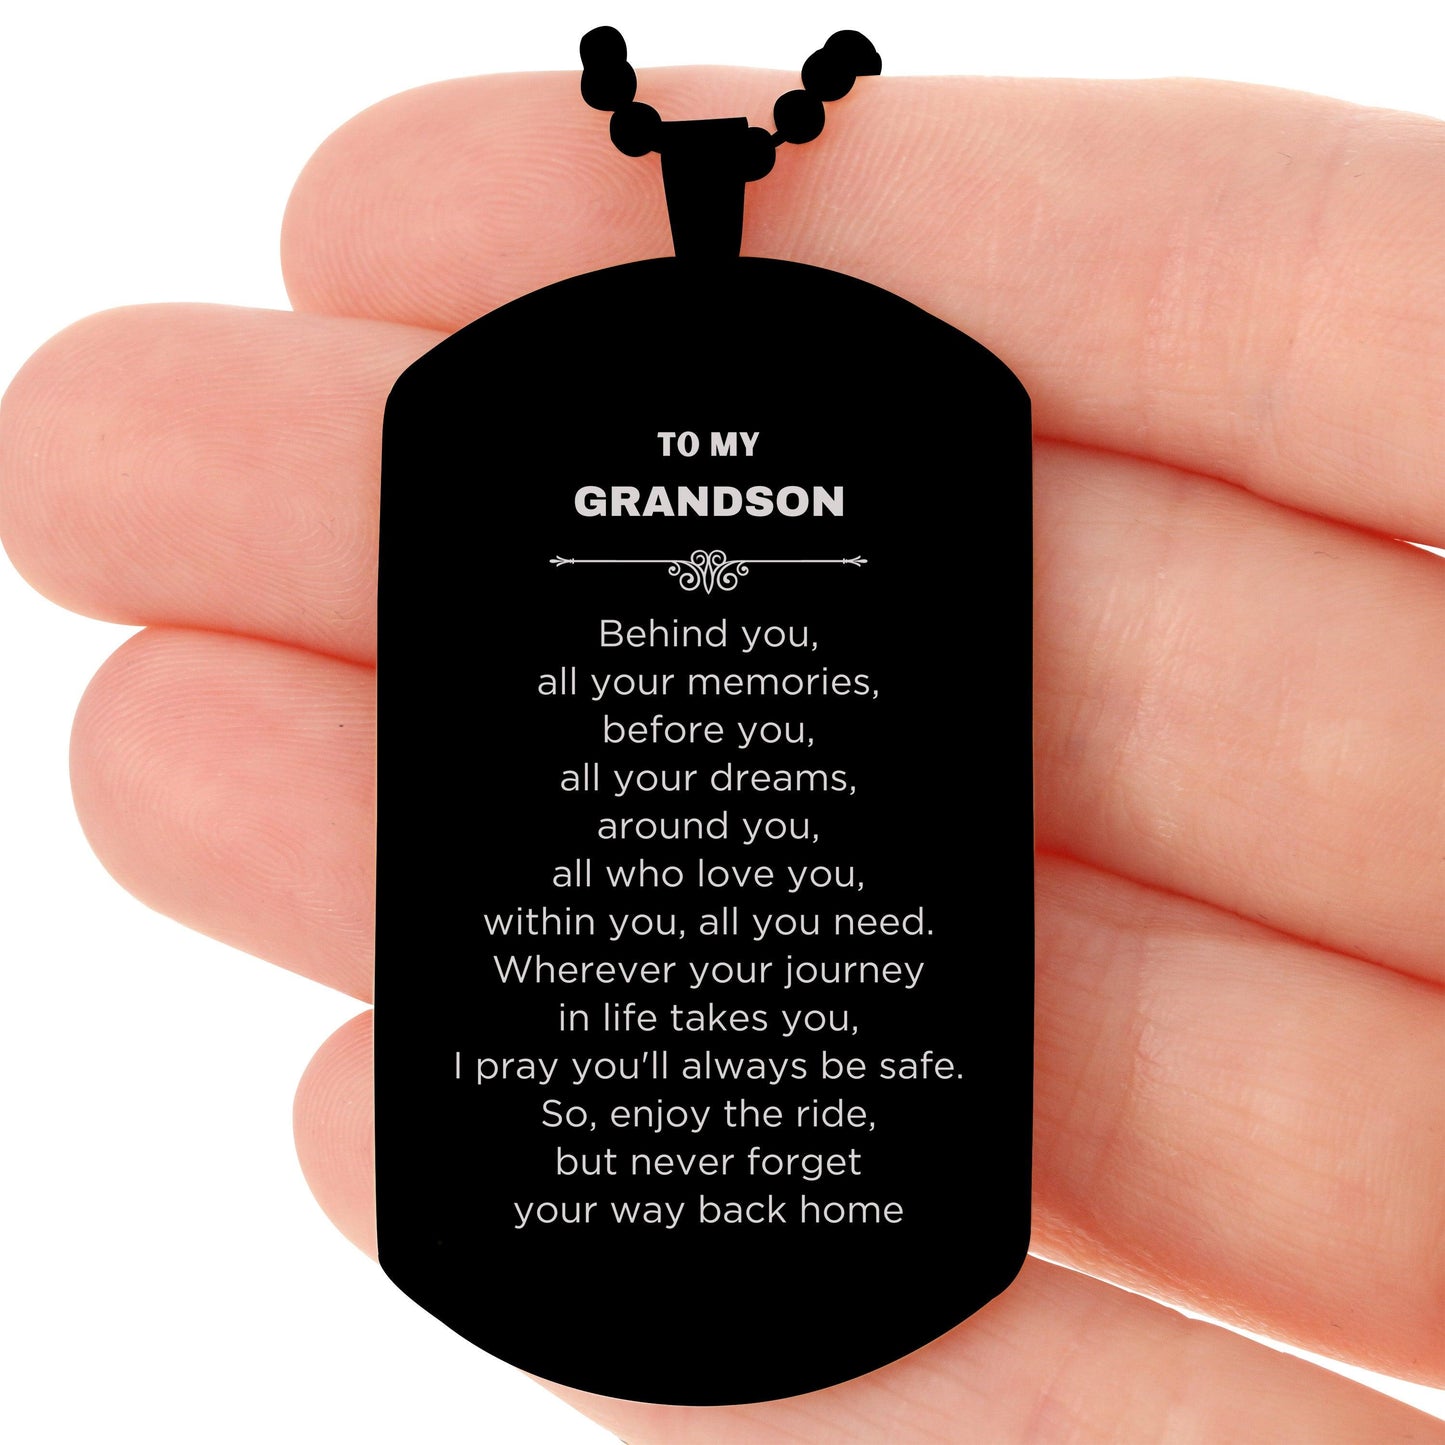 Inspirational Grandson Engraved Black Dog Tag - Behind you, all your Memories, Before you, all your Dreams - Birthday, Christmas Holiday Gifts - Mallard Moon Gift Shop